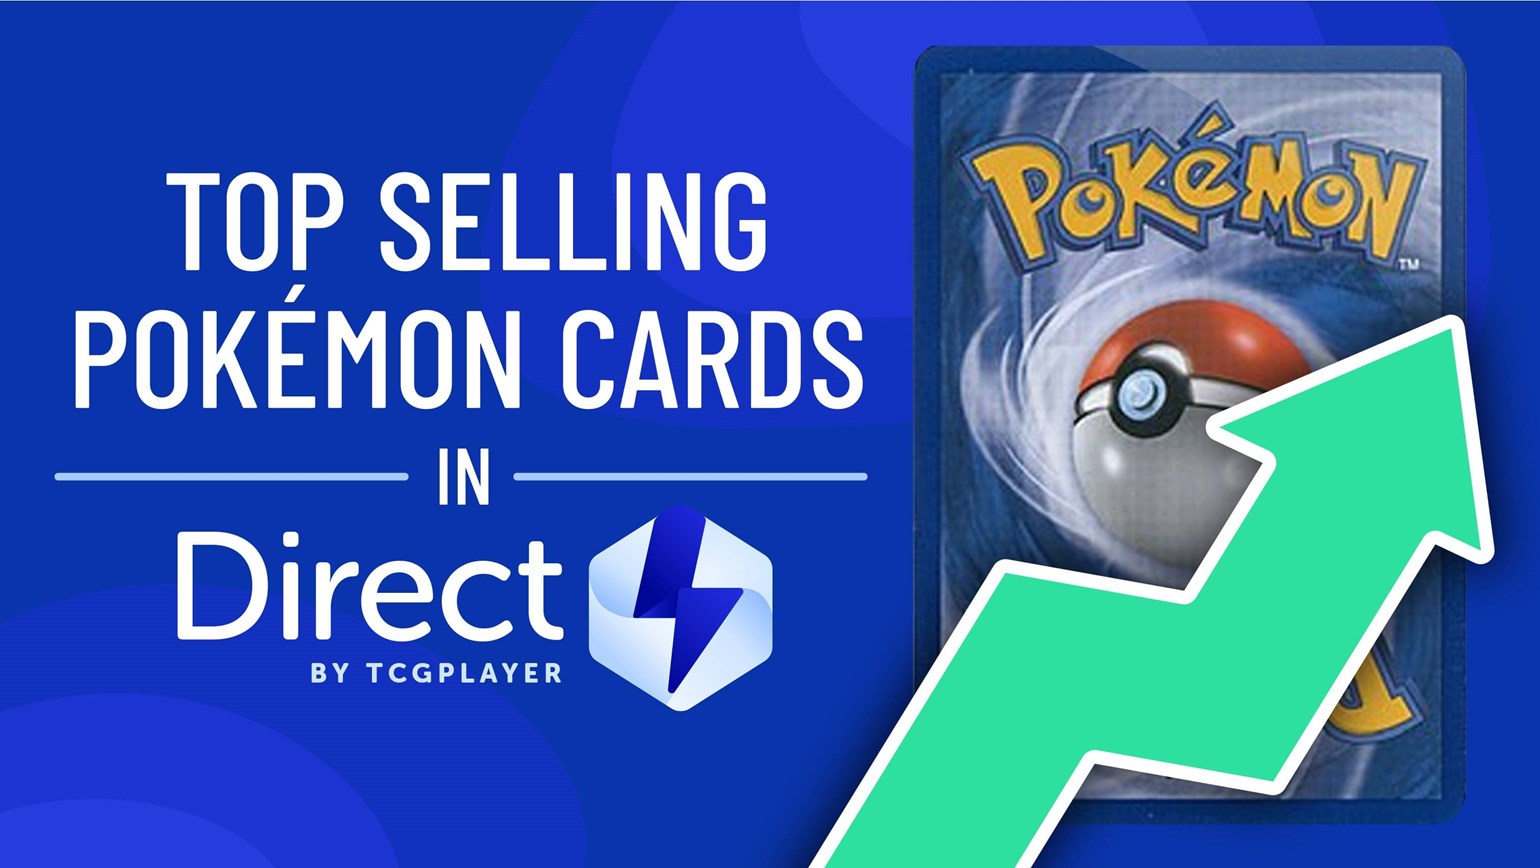 April Top Selling Pokémon Cards in Direct by TCGplayer